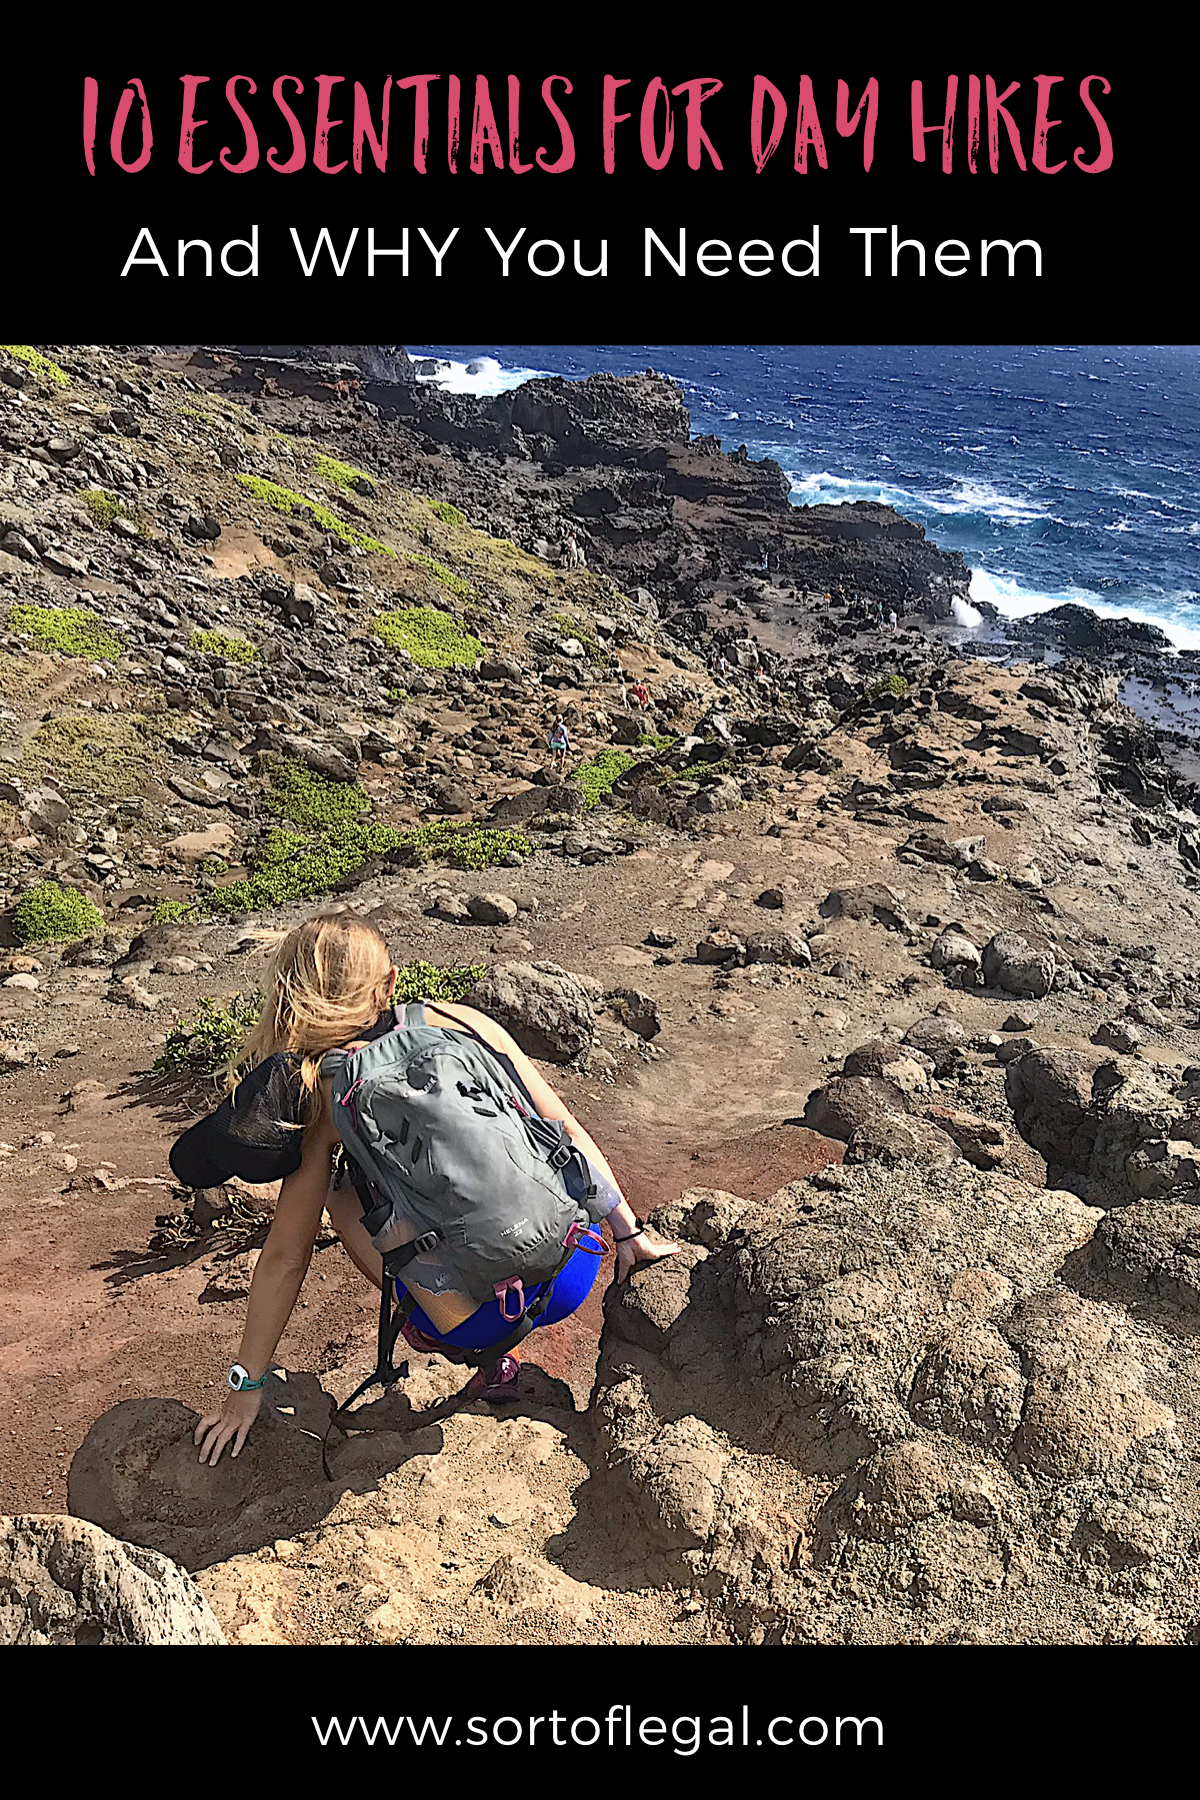 Hiking in Hawaii - The Ten Day Hiking Essentials and Why you Need Them by Larissa Bodniowycz, Remote Attorney and Travel Writer